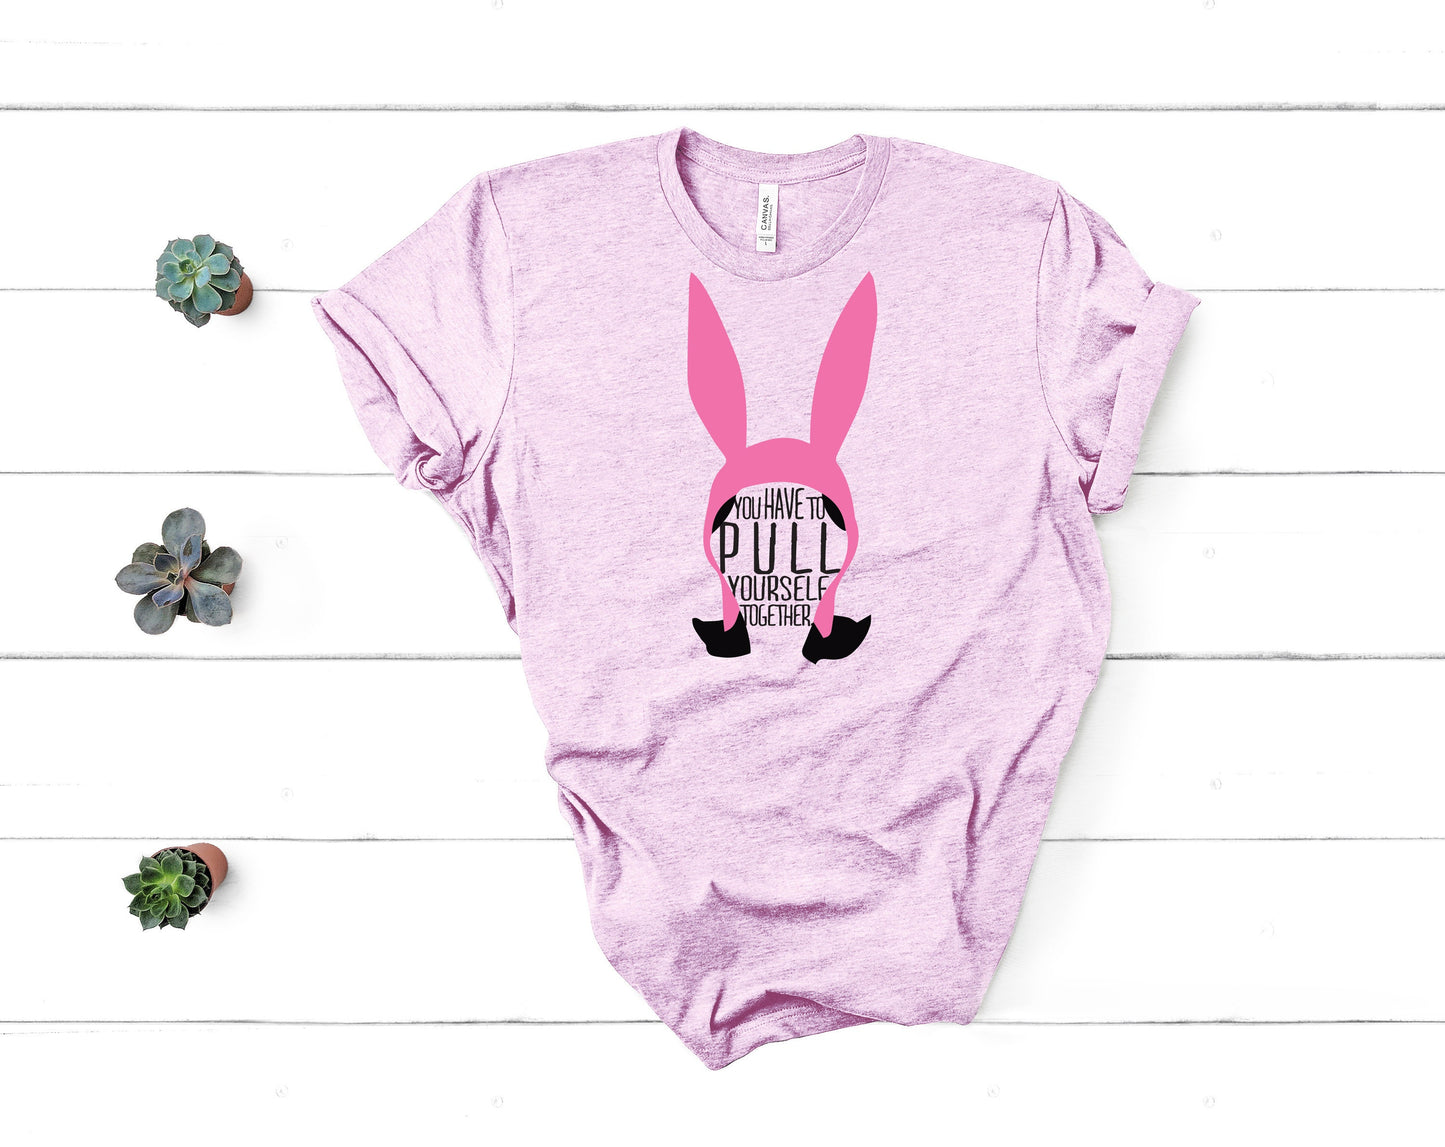 Louise Belcher - Bobs Burgers Fan - You Have To Pull Yourself Together! - Unisex Adults - Funny Gift